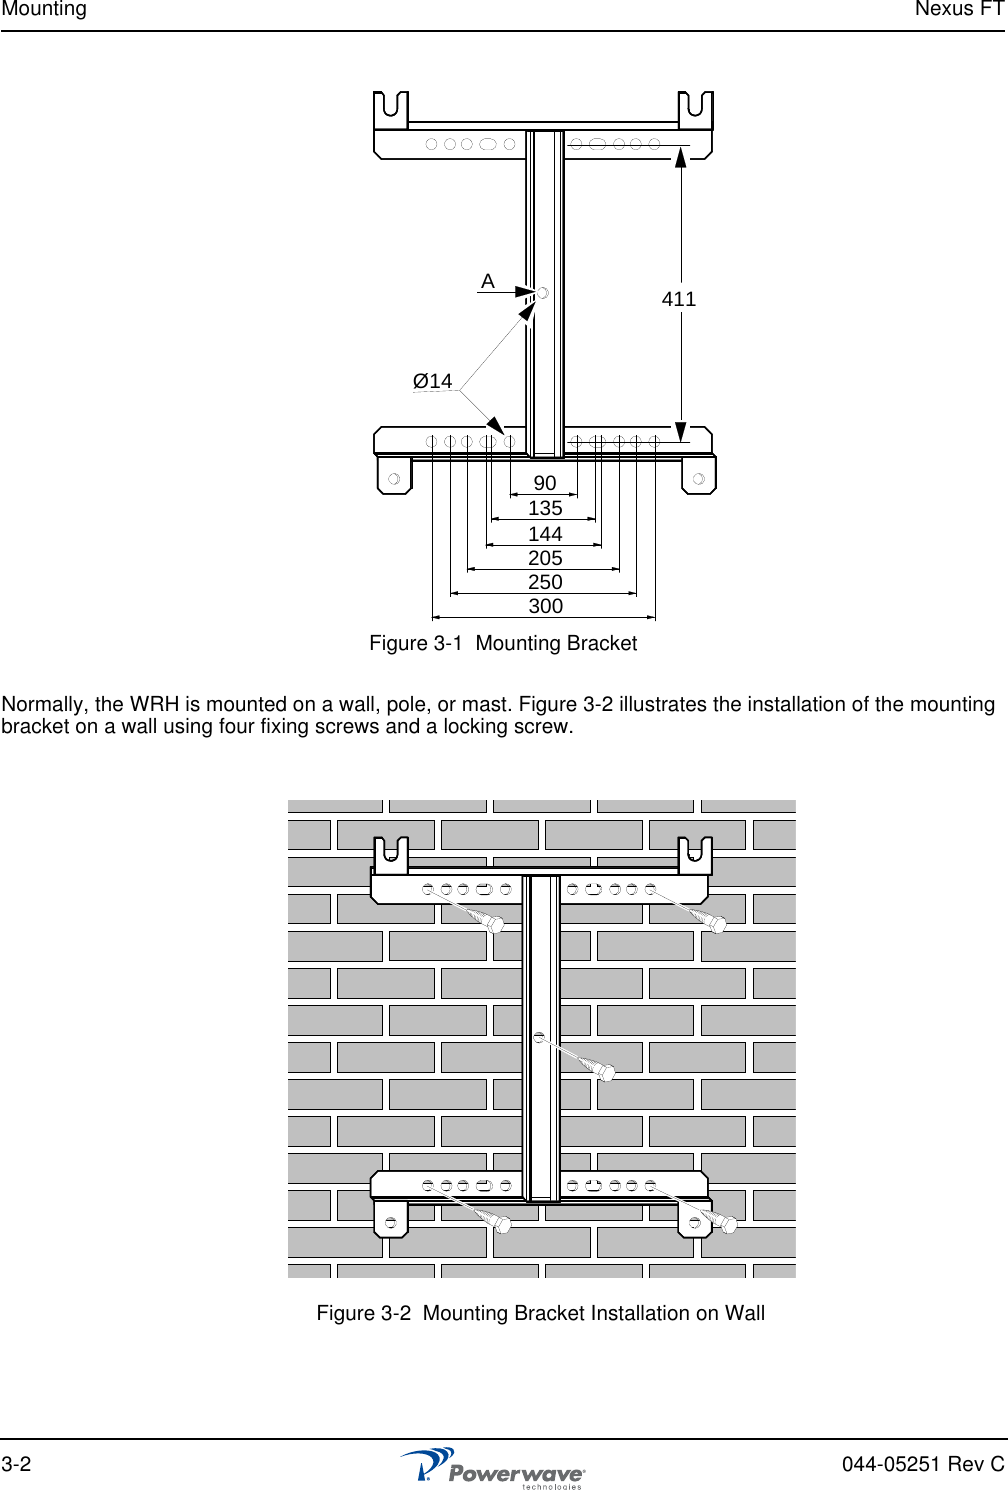 Mounting Nexus FT3-2 044-05251 Rev CFigure 3-1  Mounting BracketNormally, the WRH is mounted on a wall, pole, or mast. Figure 3-2 illustrates the installation of the mounting bracket on a wall using four fixing screws and a locking screw.Figure 3-2  Mounting Bracket Installation on Wall90135144205250300Ø14A411